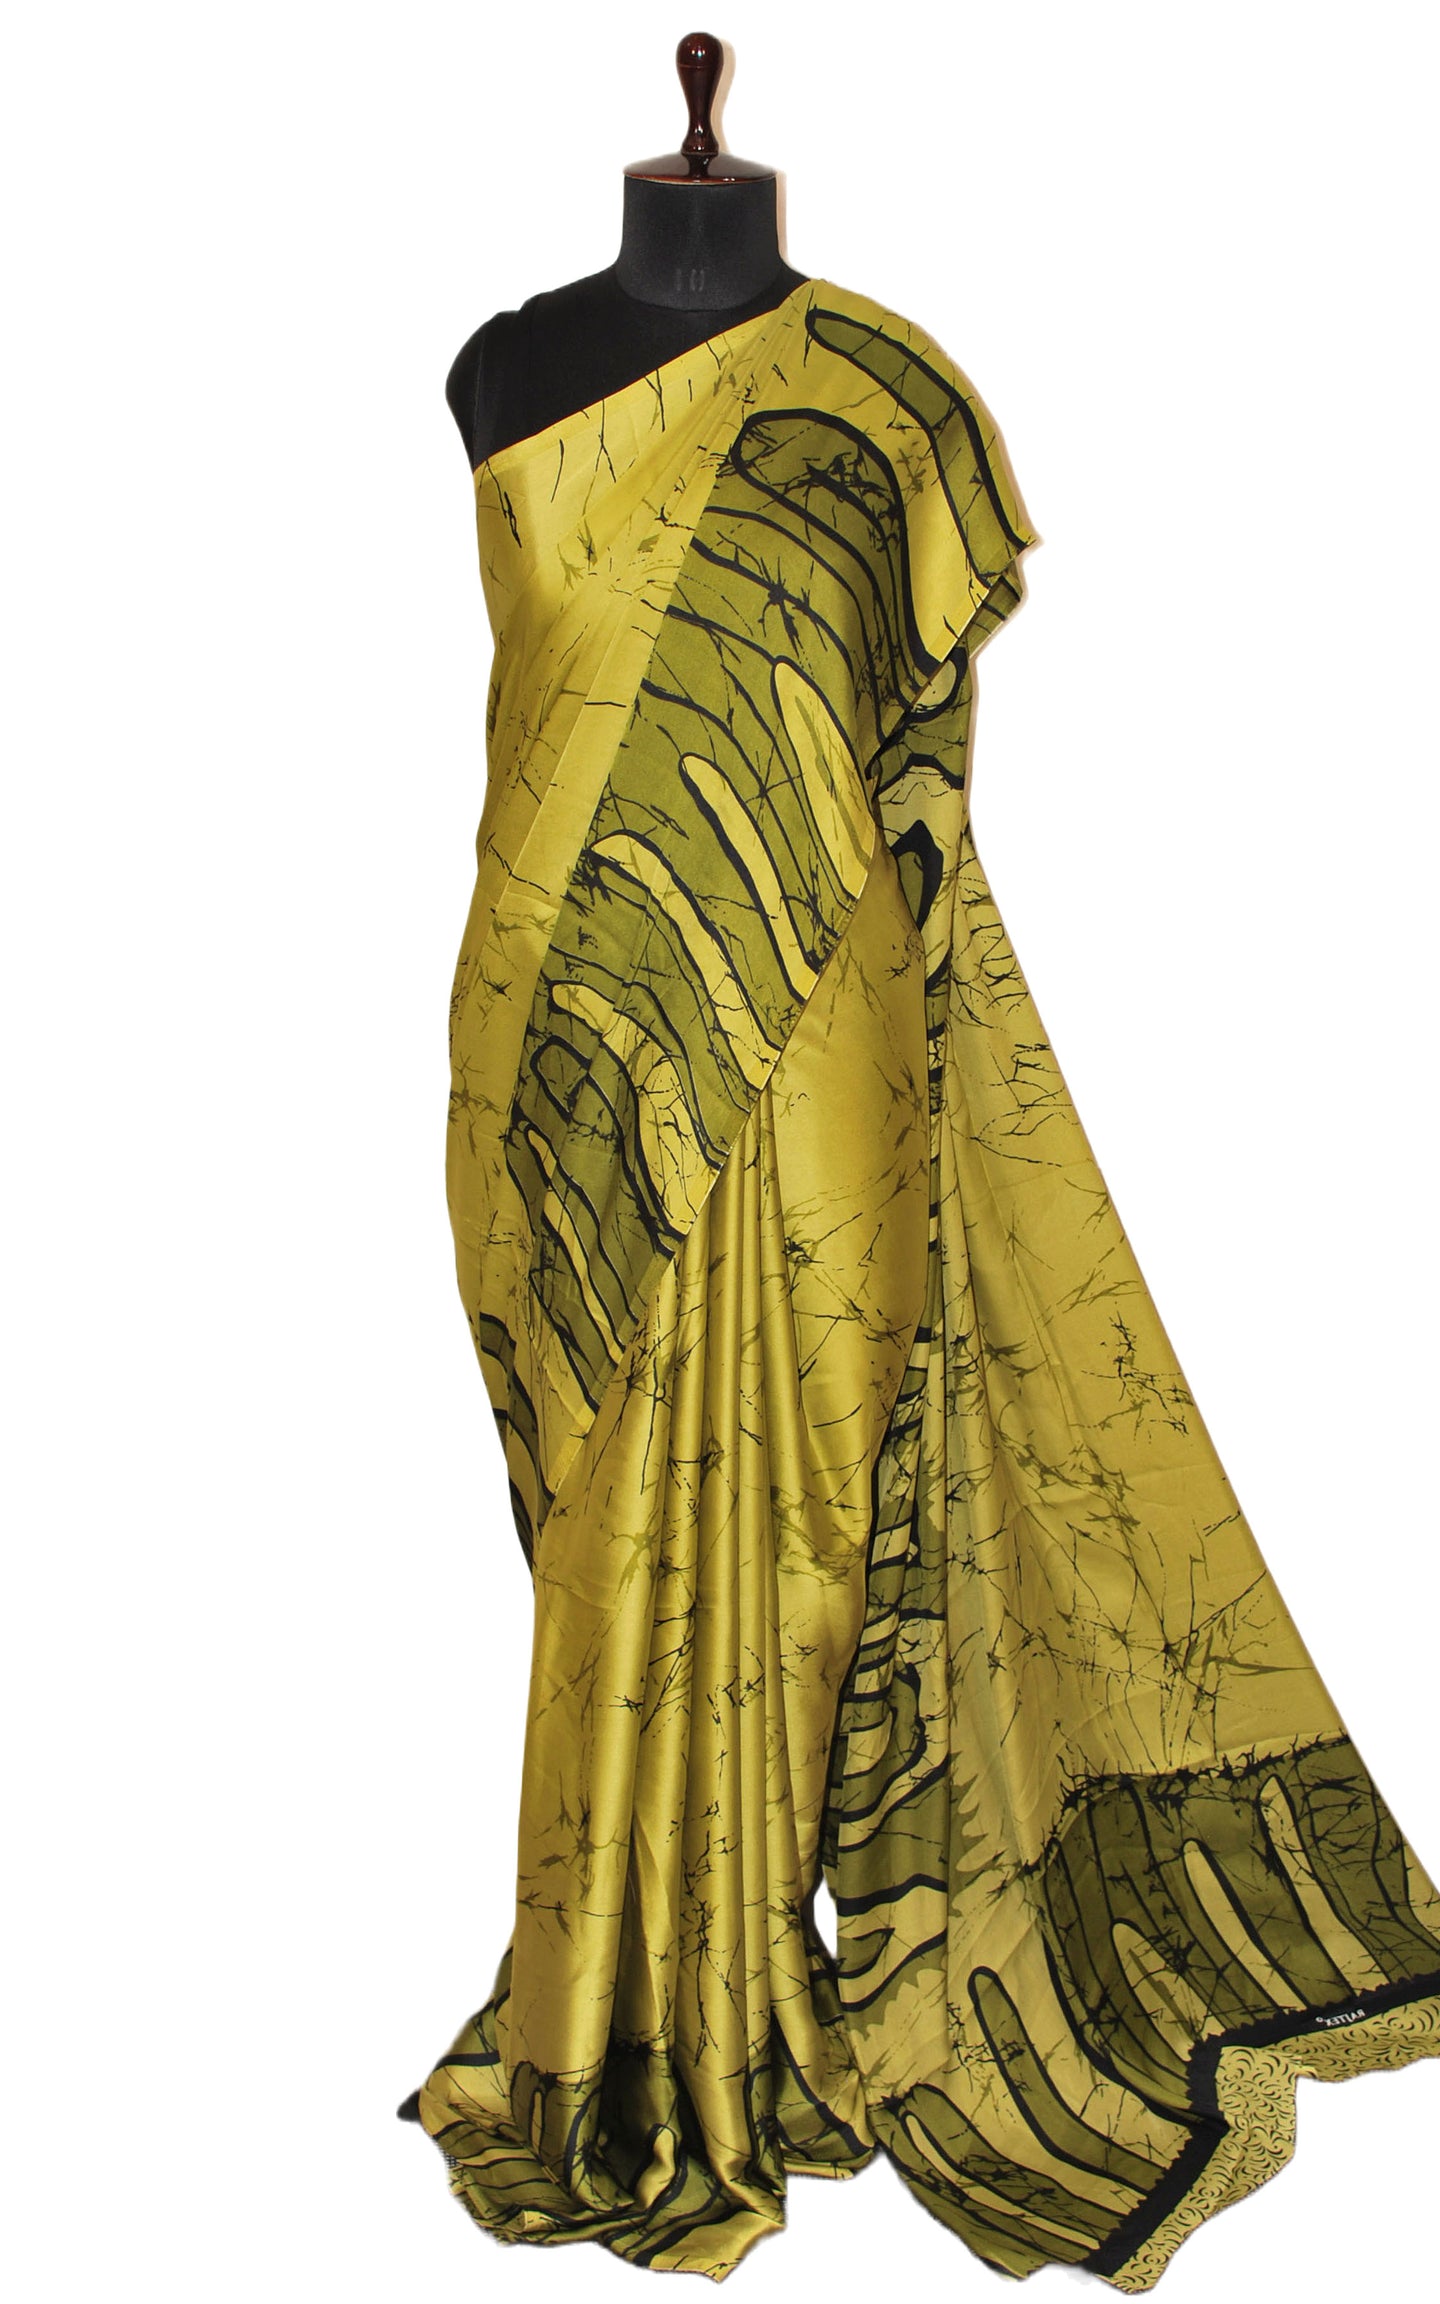 Printed Soft Crepe Silk Saree in Dirty Gold, Black and Olive Green